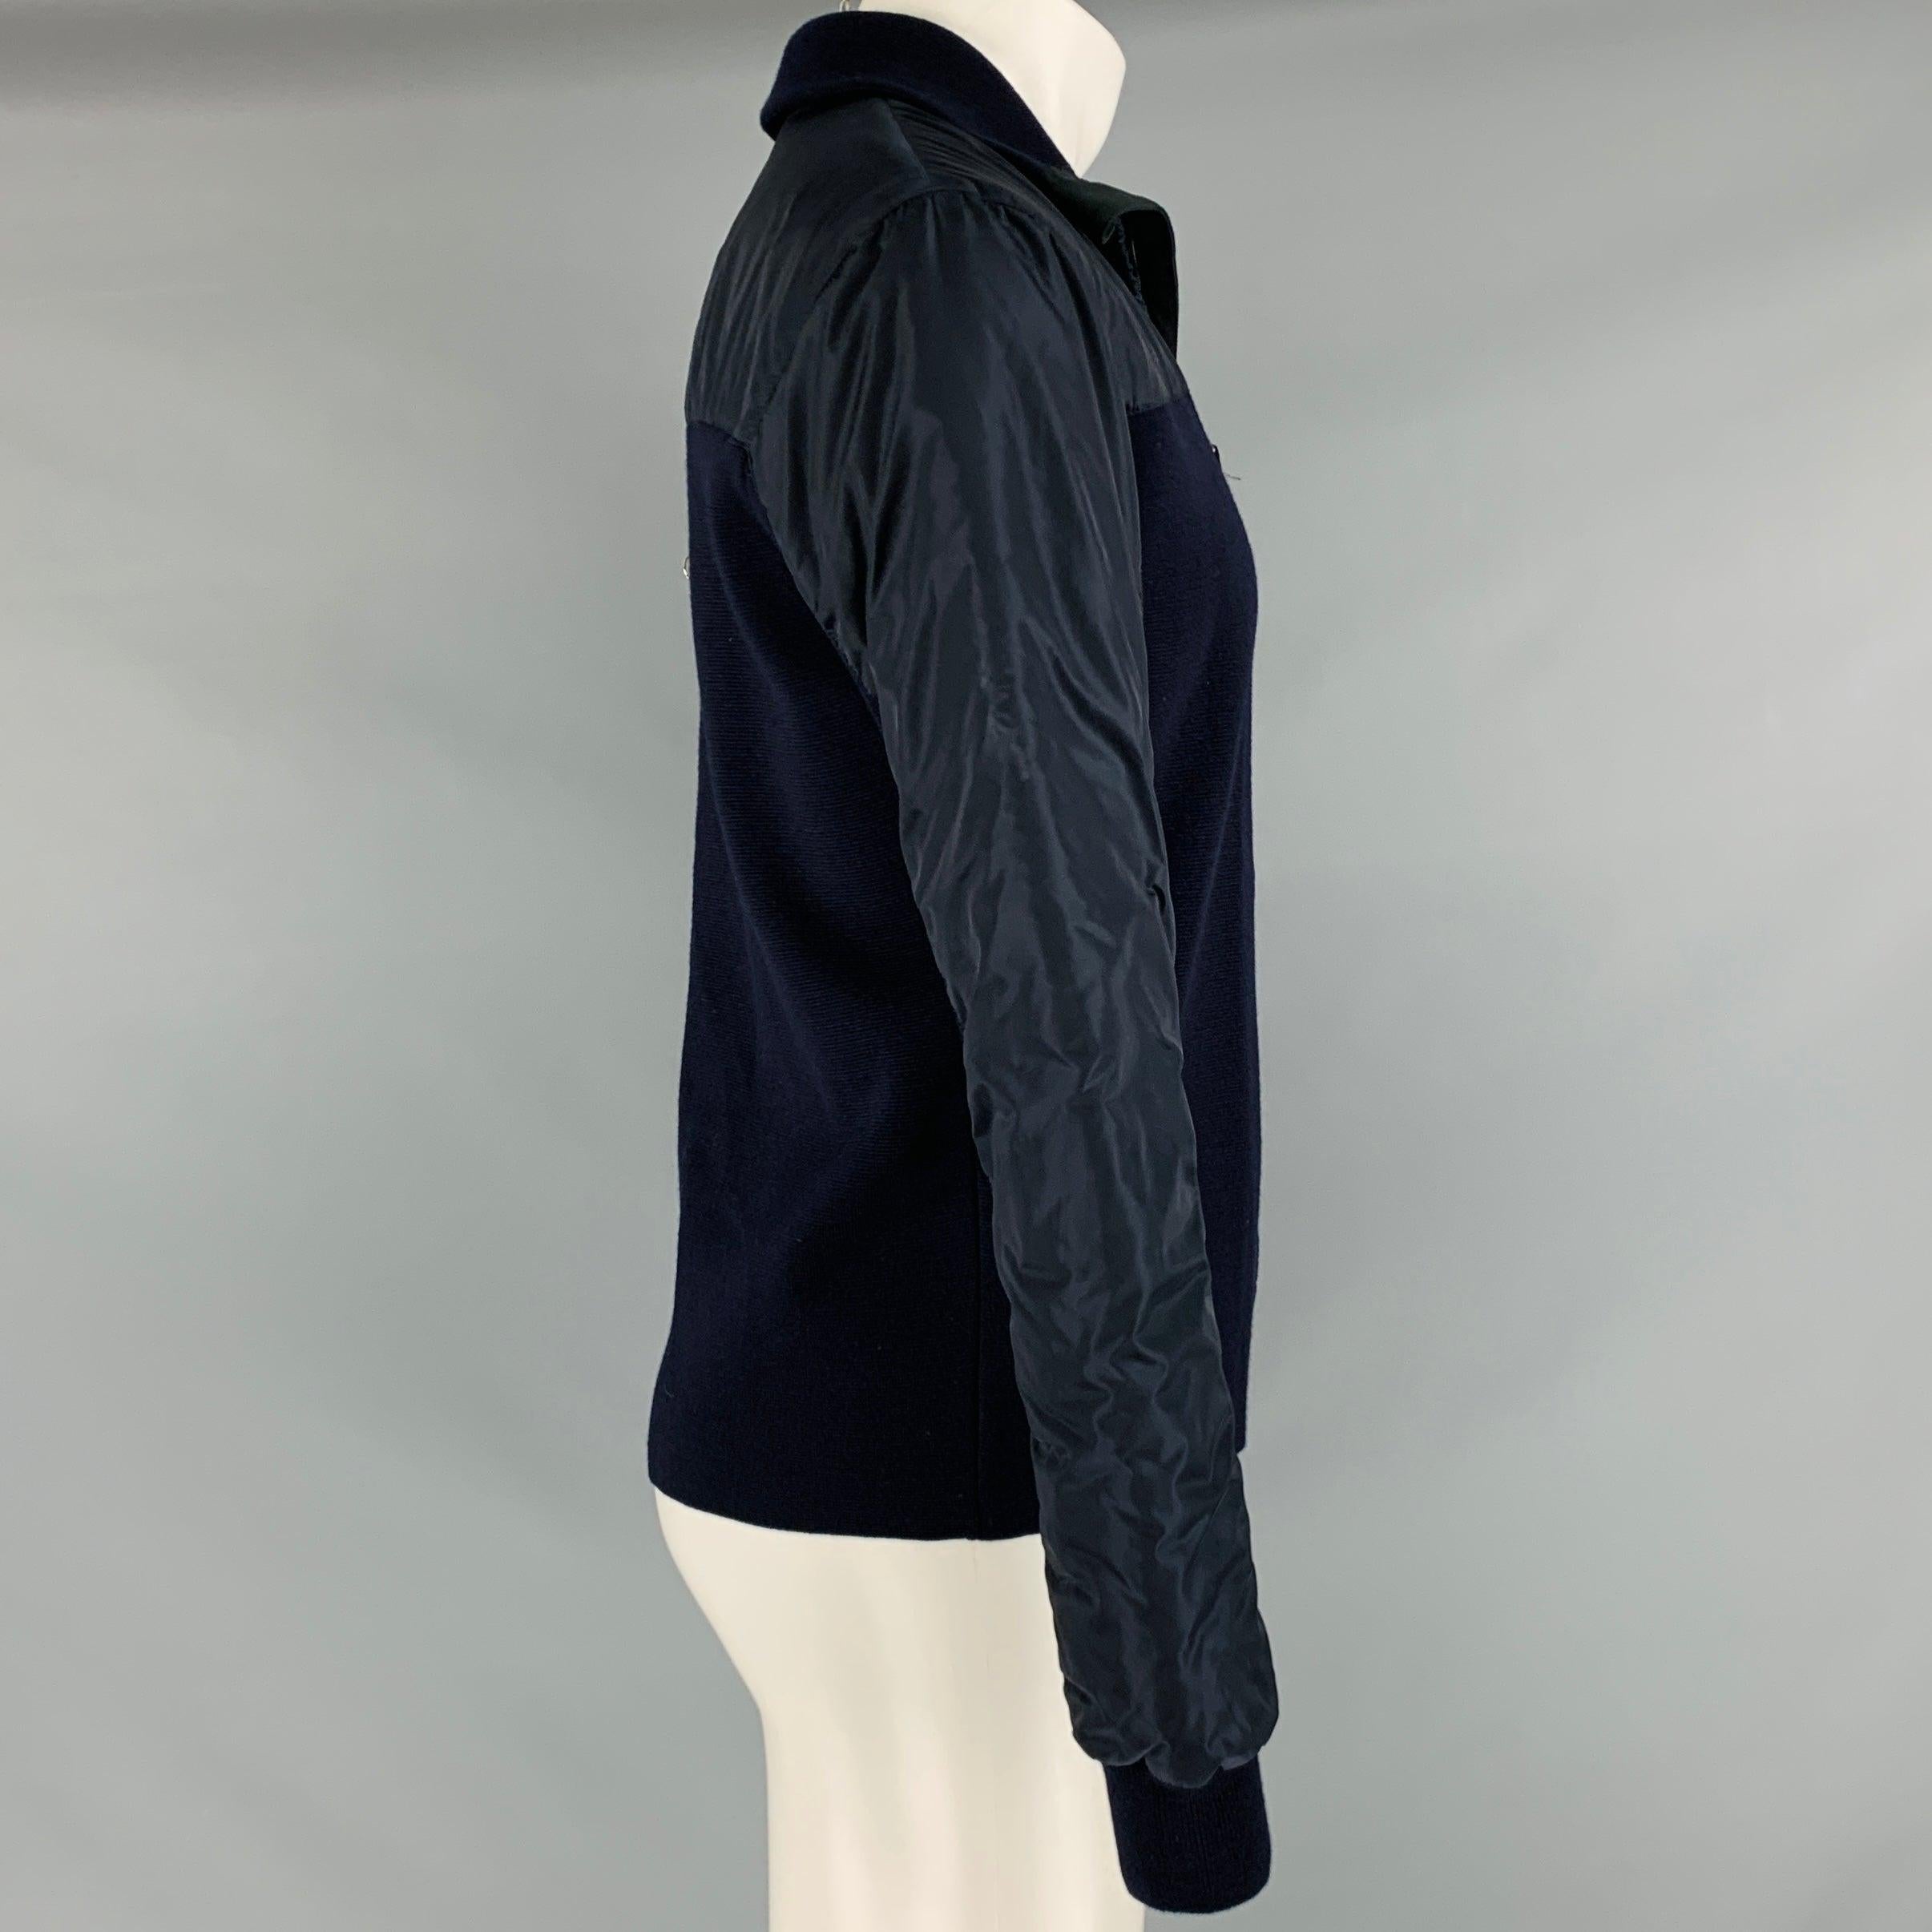 PRADA Size 40 Navy Mixed Fabrics Wool Zip Up Jacket In Good Condition For Sale In San Francisco, CA